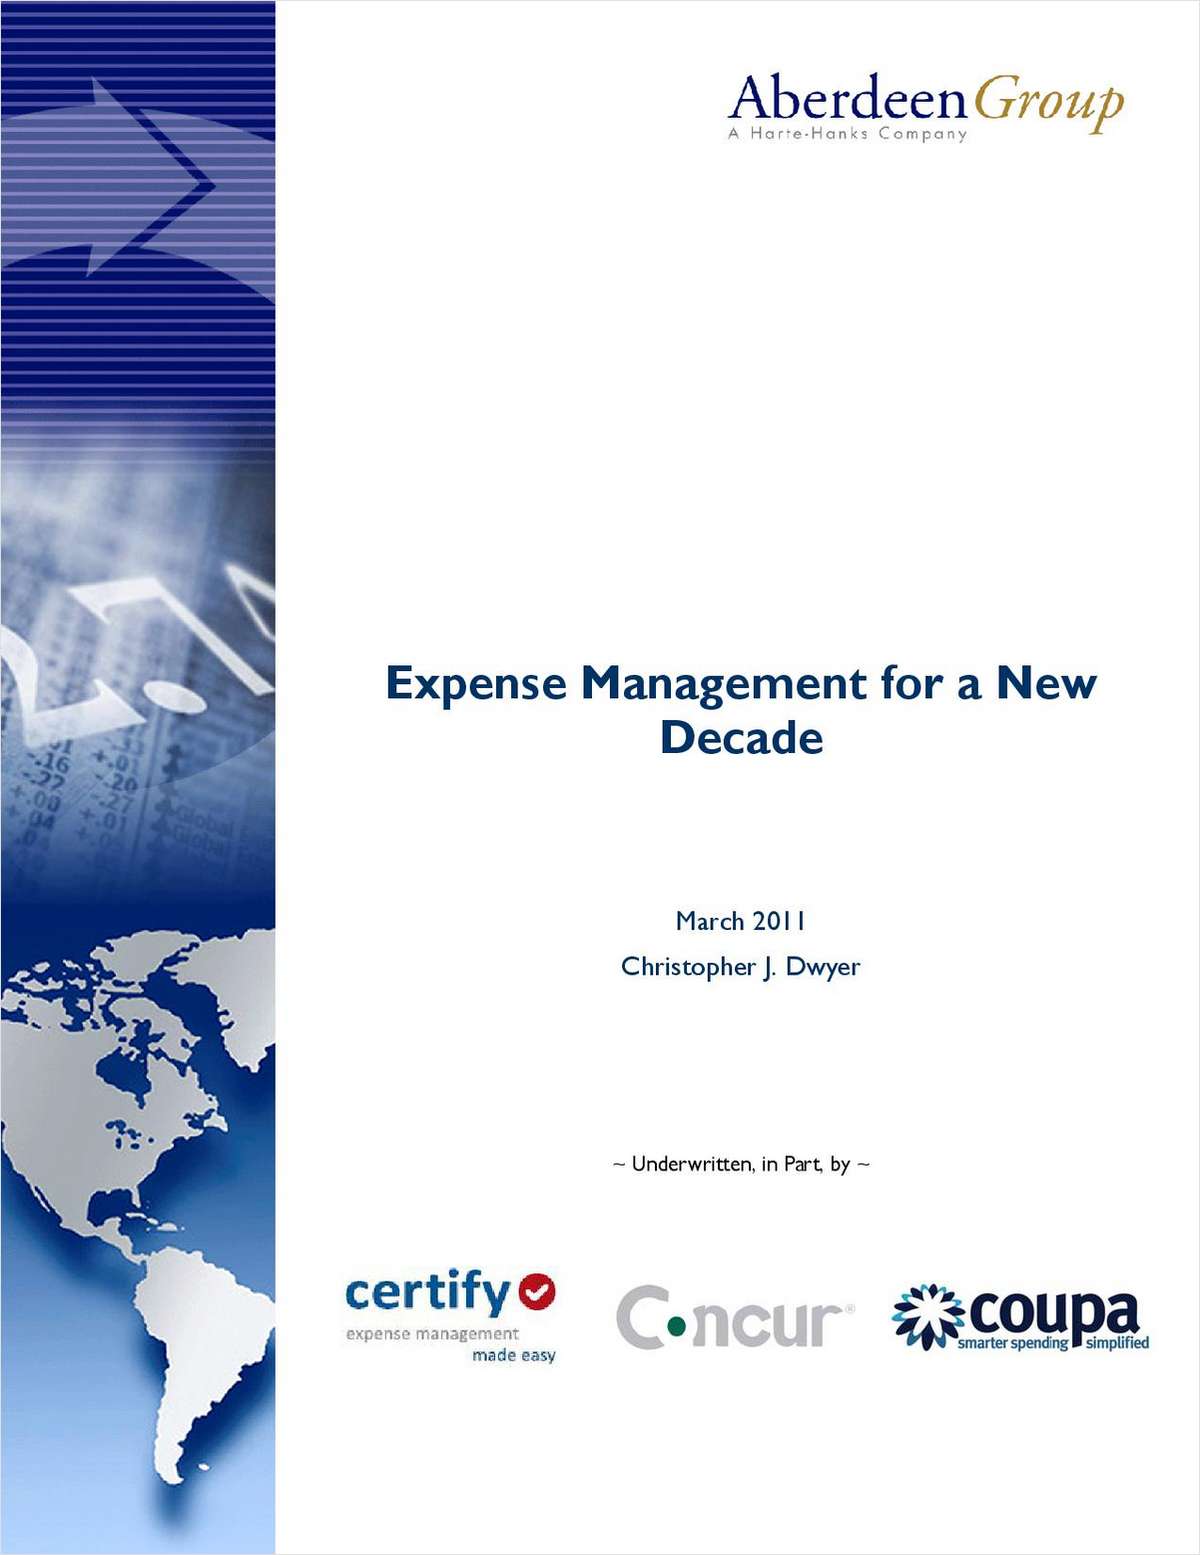 Expense Management for a New Decade